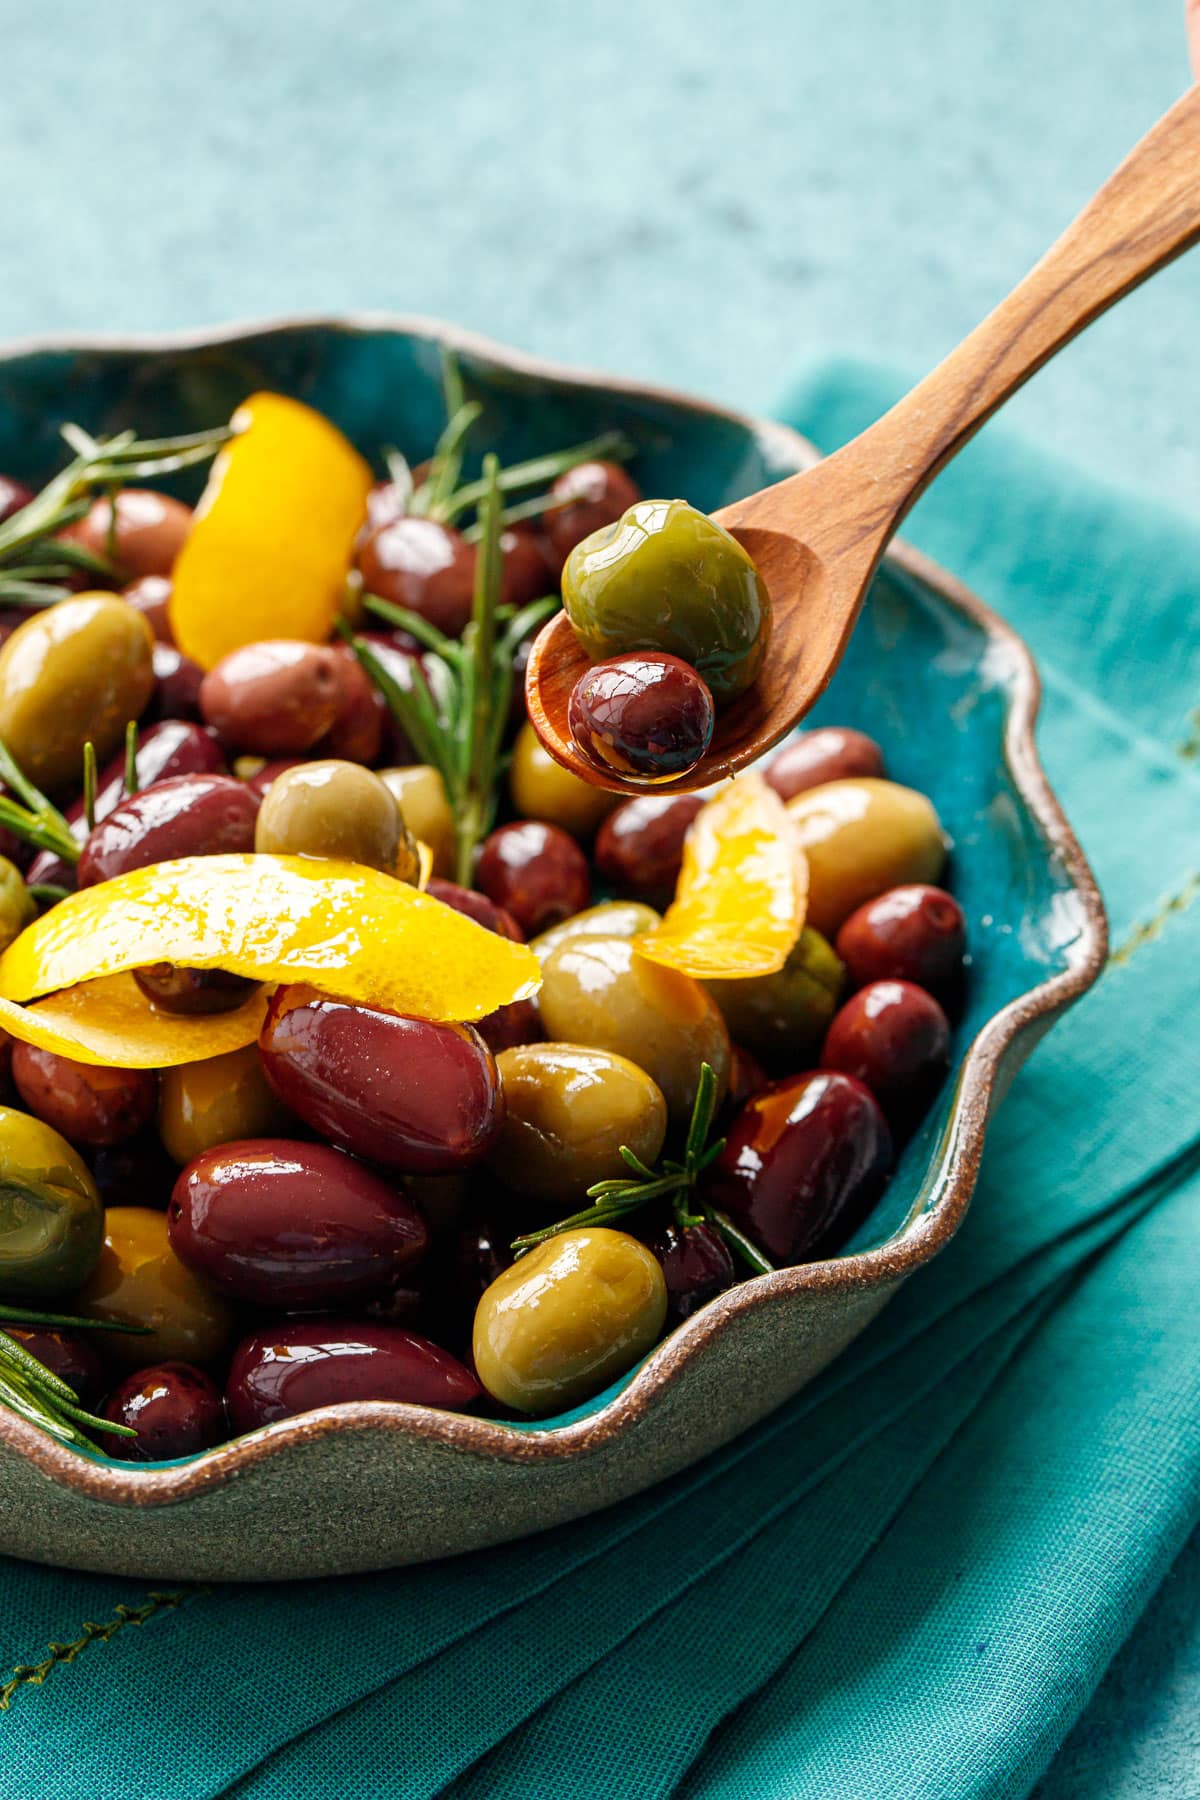 Closeup, small wooden spoon lifting one purple and one green olive above a bowl filled with shiny sauteed olives with pieces of lemon peel and rosemary.